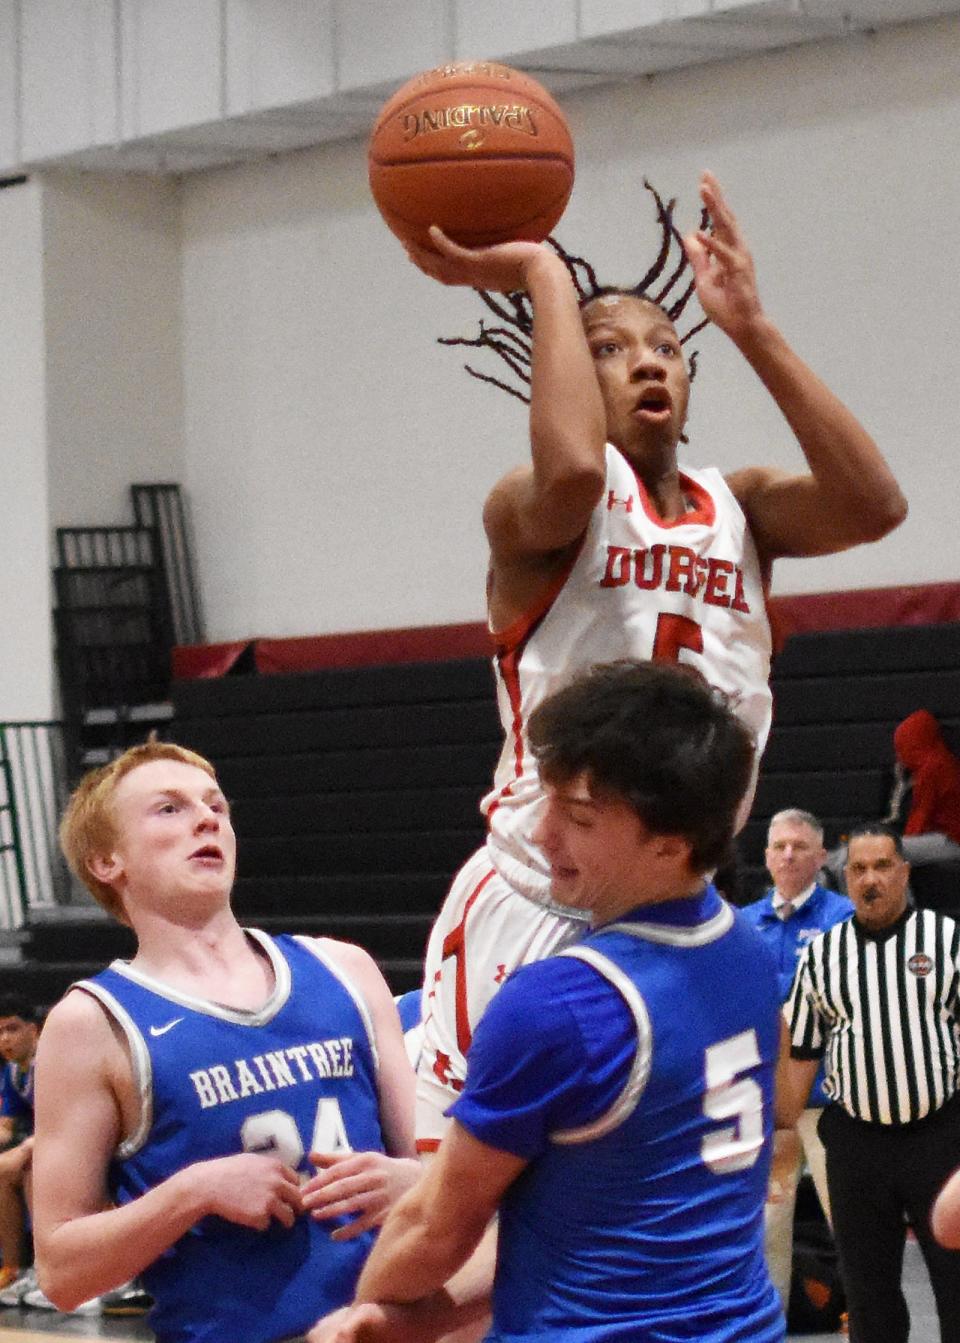 Durfee's Jahmier Stephenson goes up for twp points during a recent non-league contest at B.M.C. Durfee High School Feb. 16, 2024.